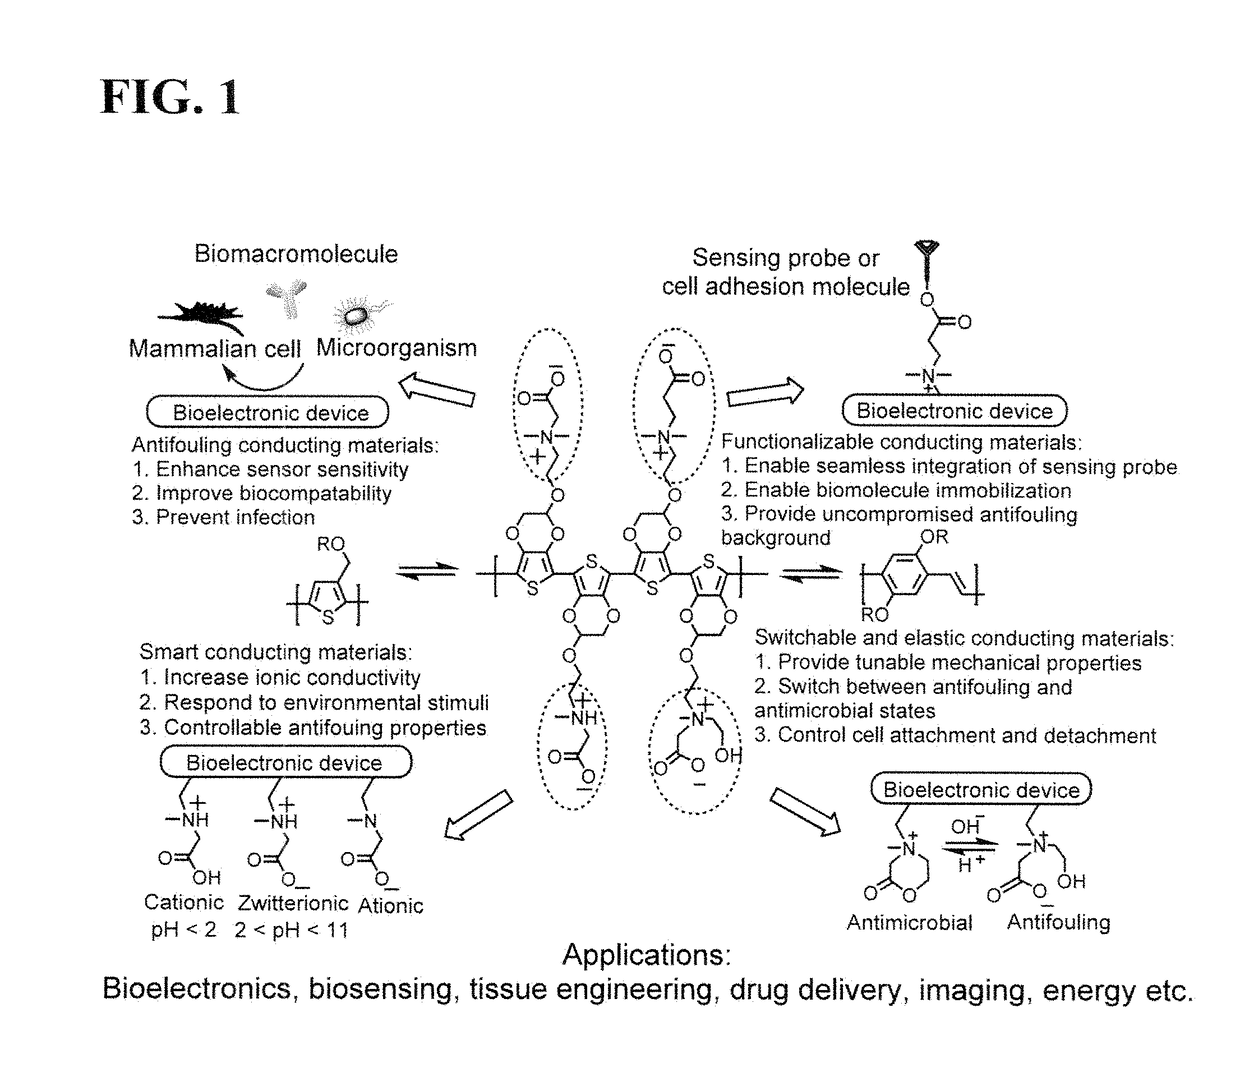 Integrated zwitterionic conjugated polymers for bioelectronics, biosensing, regenerative medicine, and energy applications